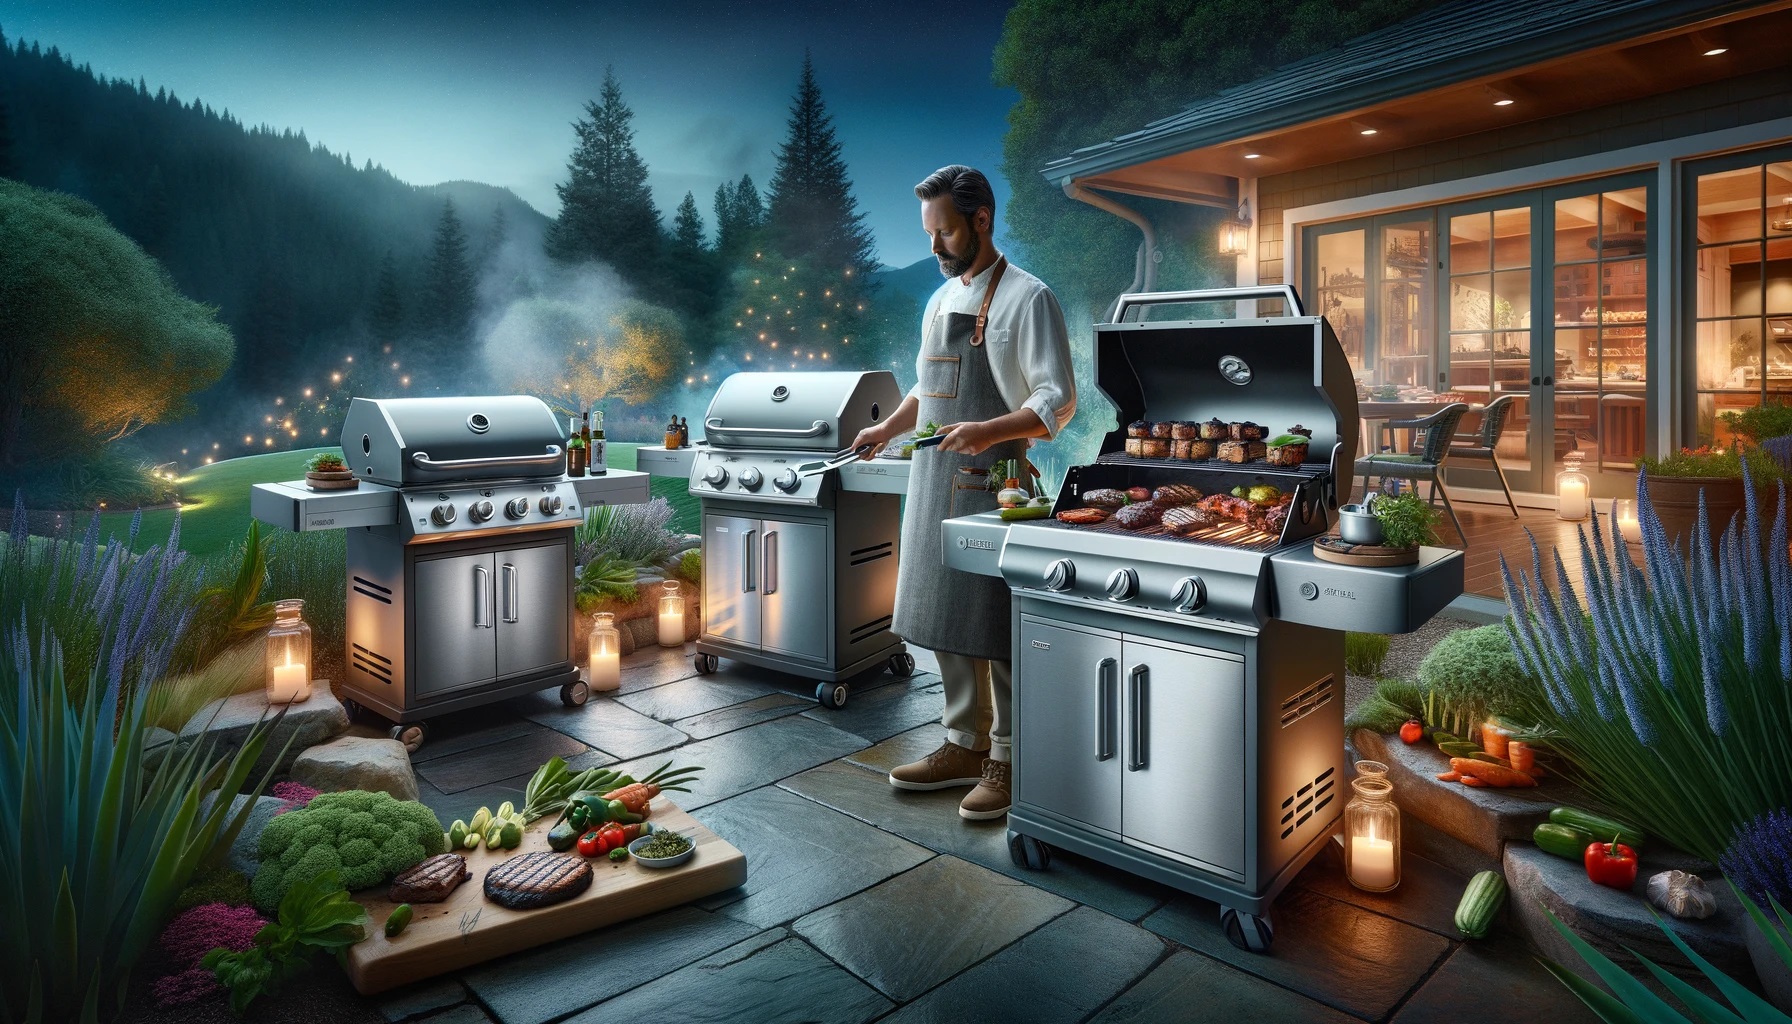 A stunning, high-resolution image capturing the essence of outdoor grilling in a backyard setting.